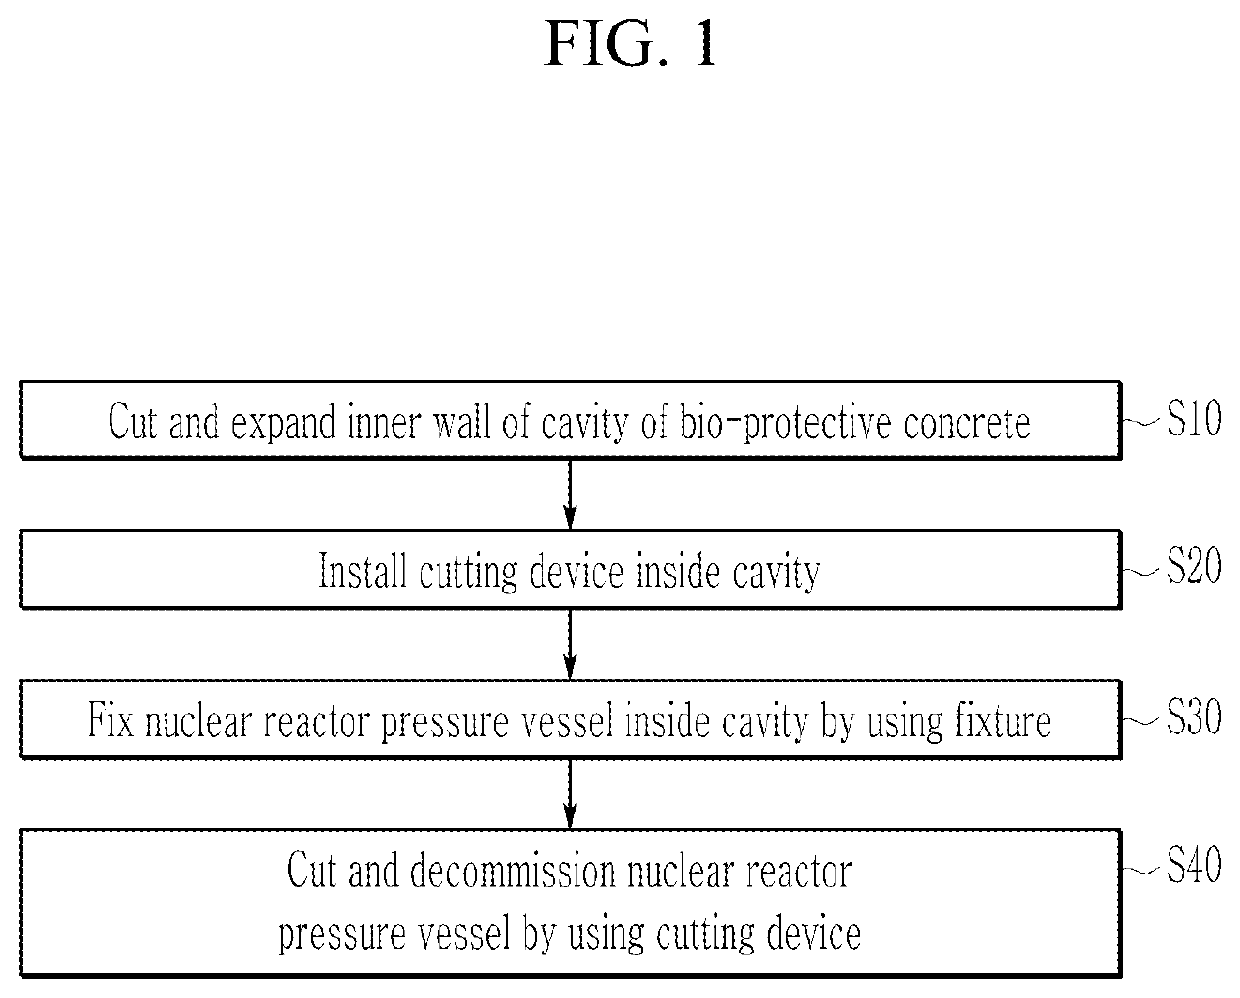 Complex decommissioning method for nuclear facility